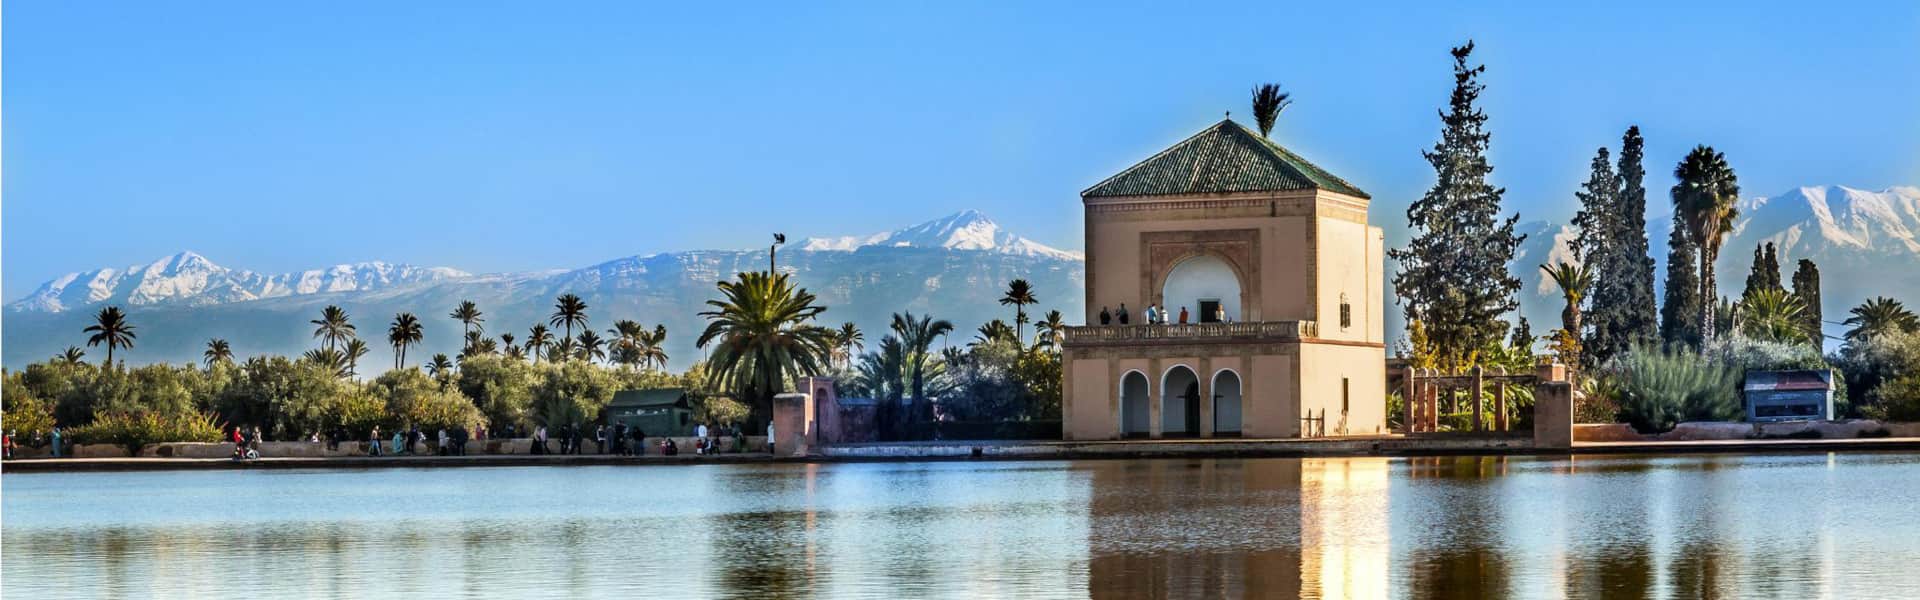 Photo Gallery of Our Memorable Tours in Morocco